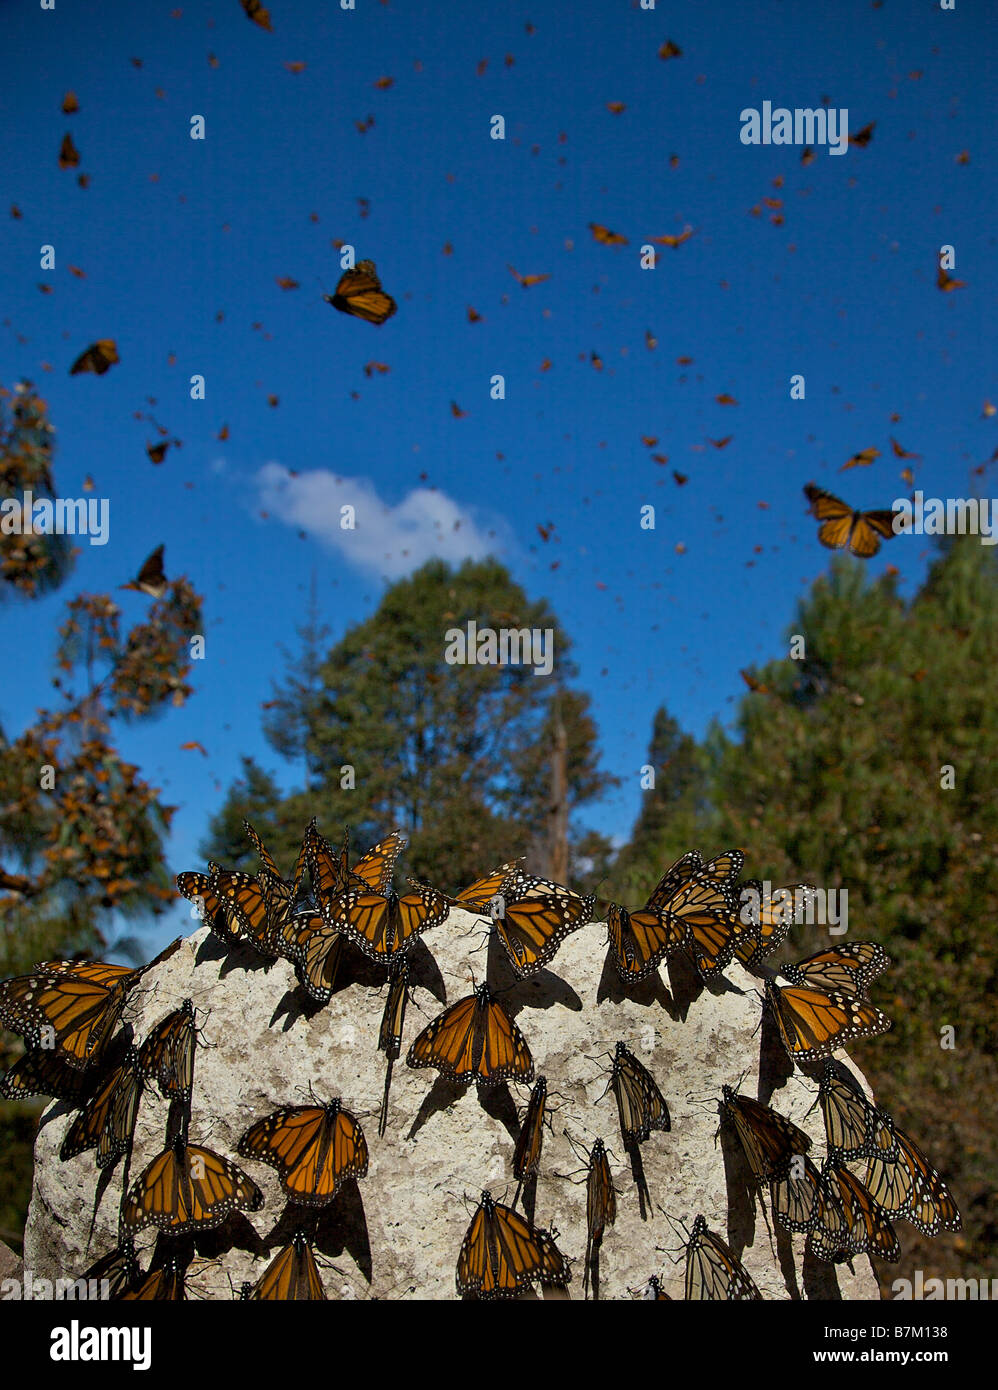 Monarch Butterflies mass along the path in the Sierra Pellon Monarch Butterfly Biosphere Reserve near Angangueo, Michoacan, Mexico. Stock Photo